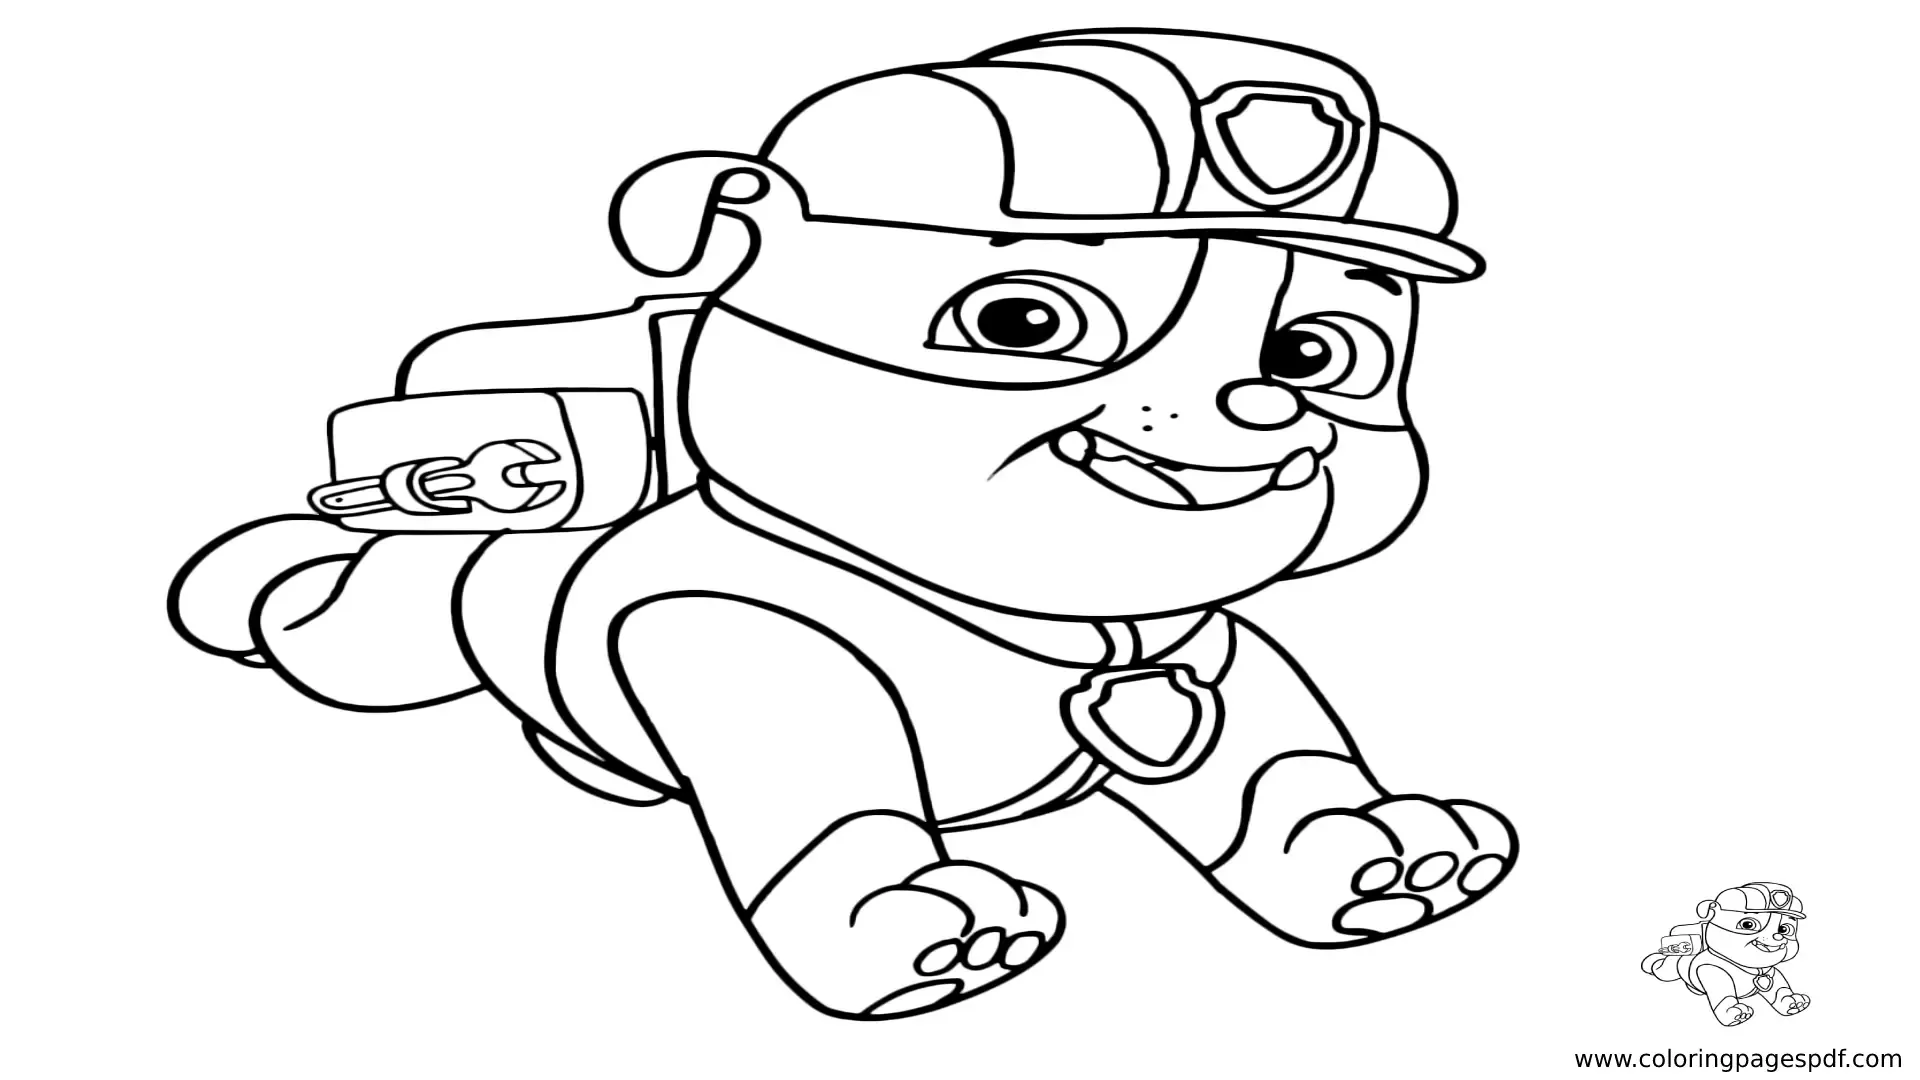 Coloring Pages Of Rubble Running